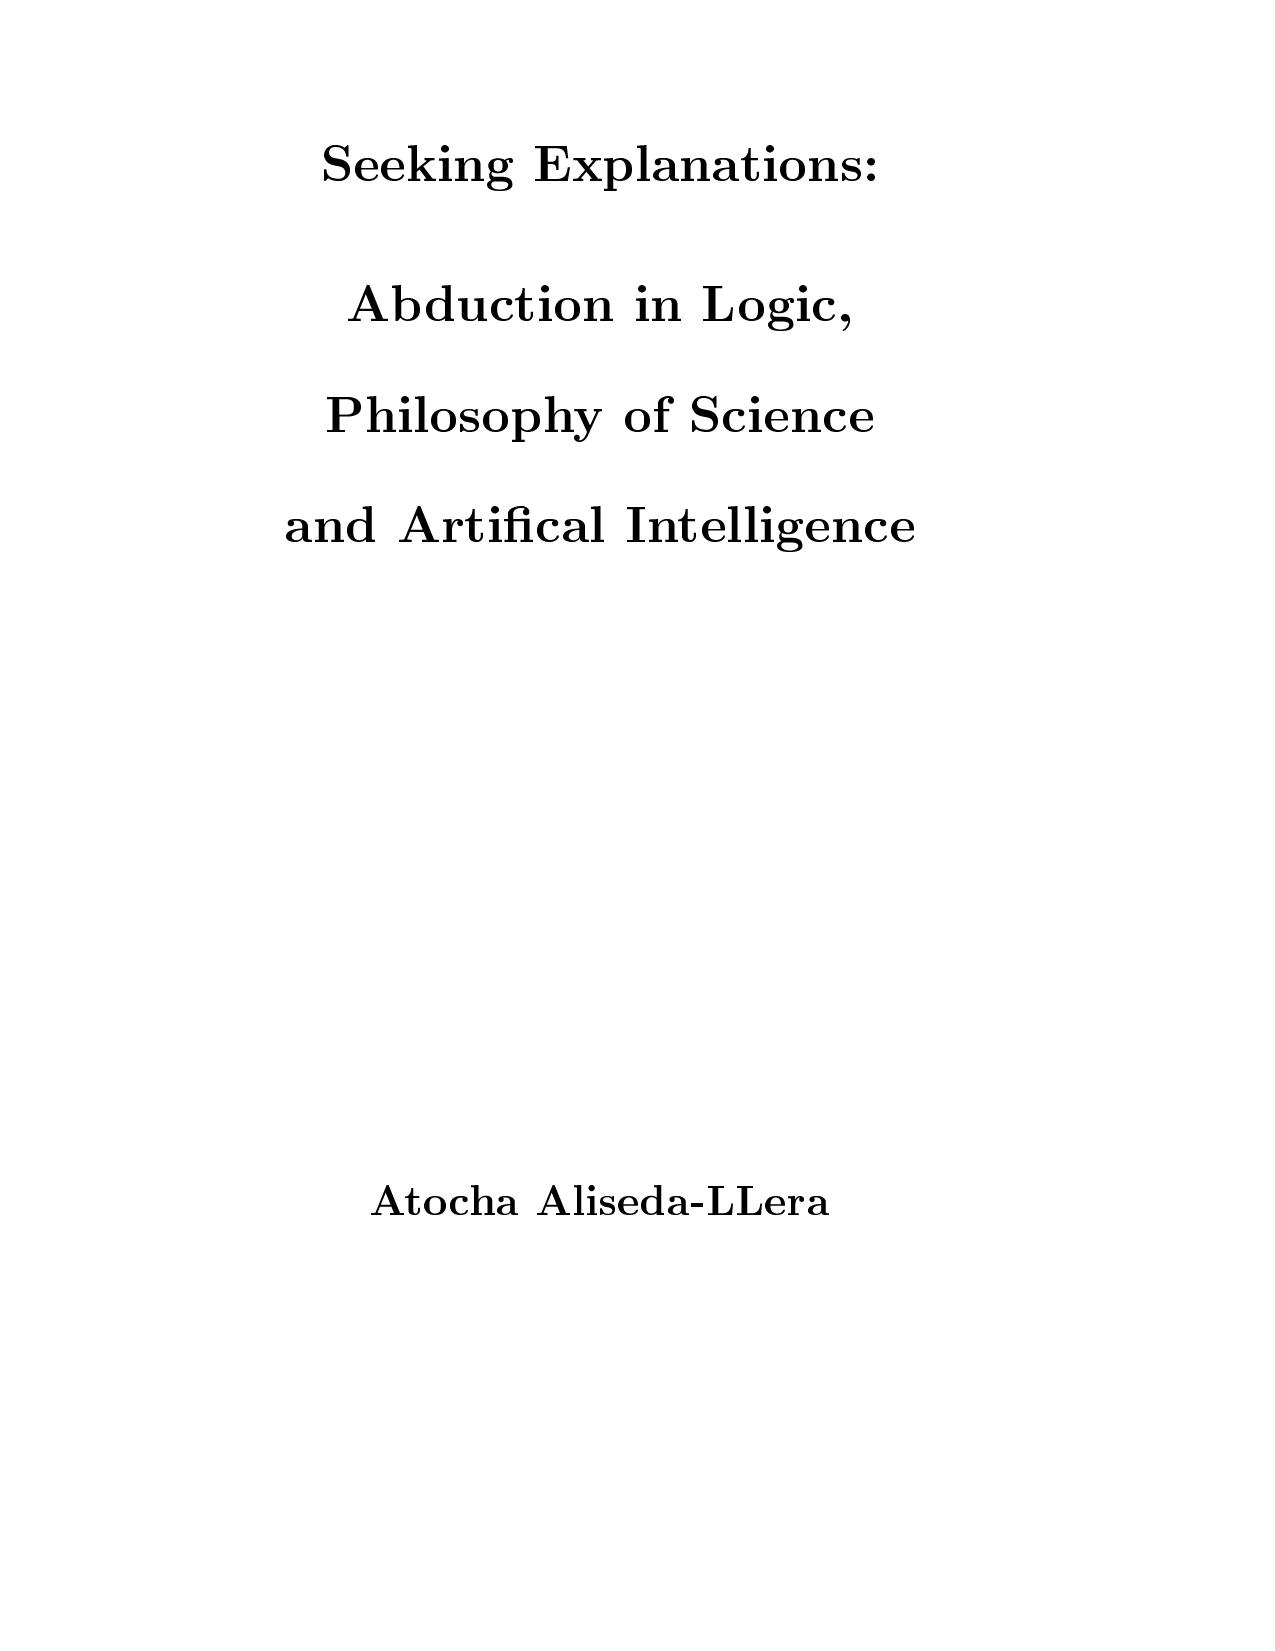 Abduction in Logic, Philosophy of Science & Artical Intelligence